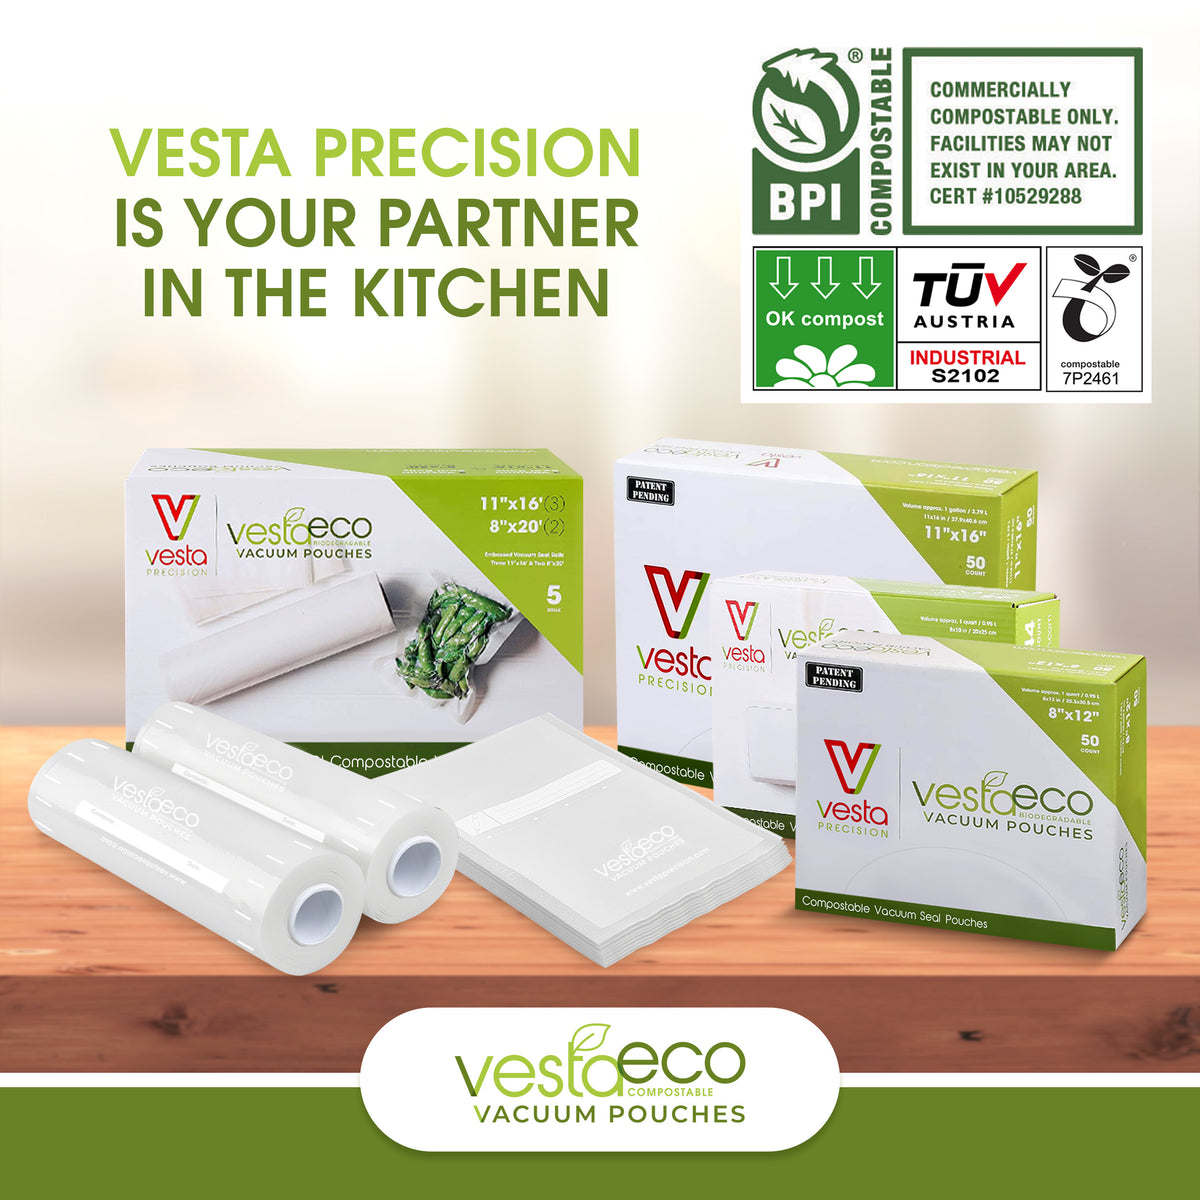 An infographic stating Vesta Precision is your partner in the kitchen with the BPI, OKCompost, and Seedling certification icons.